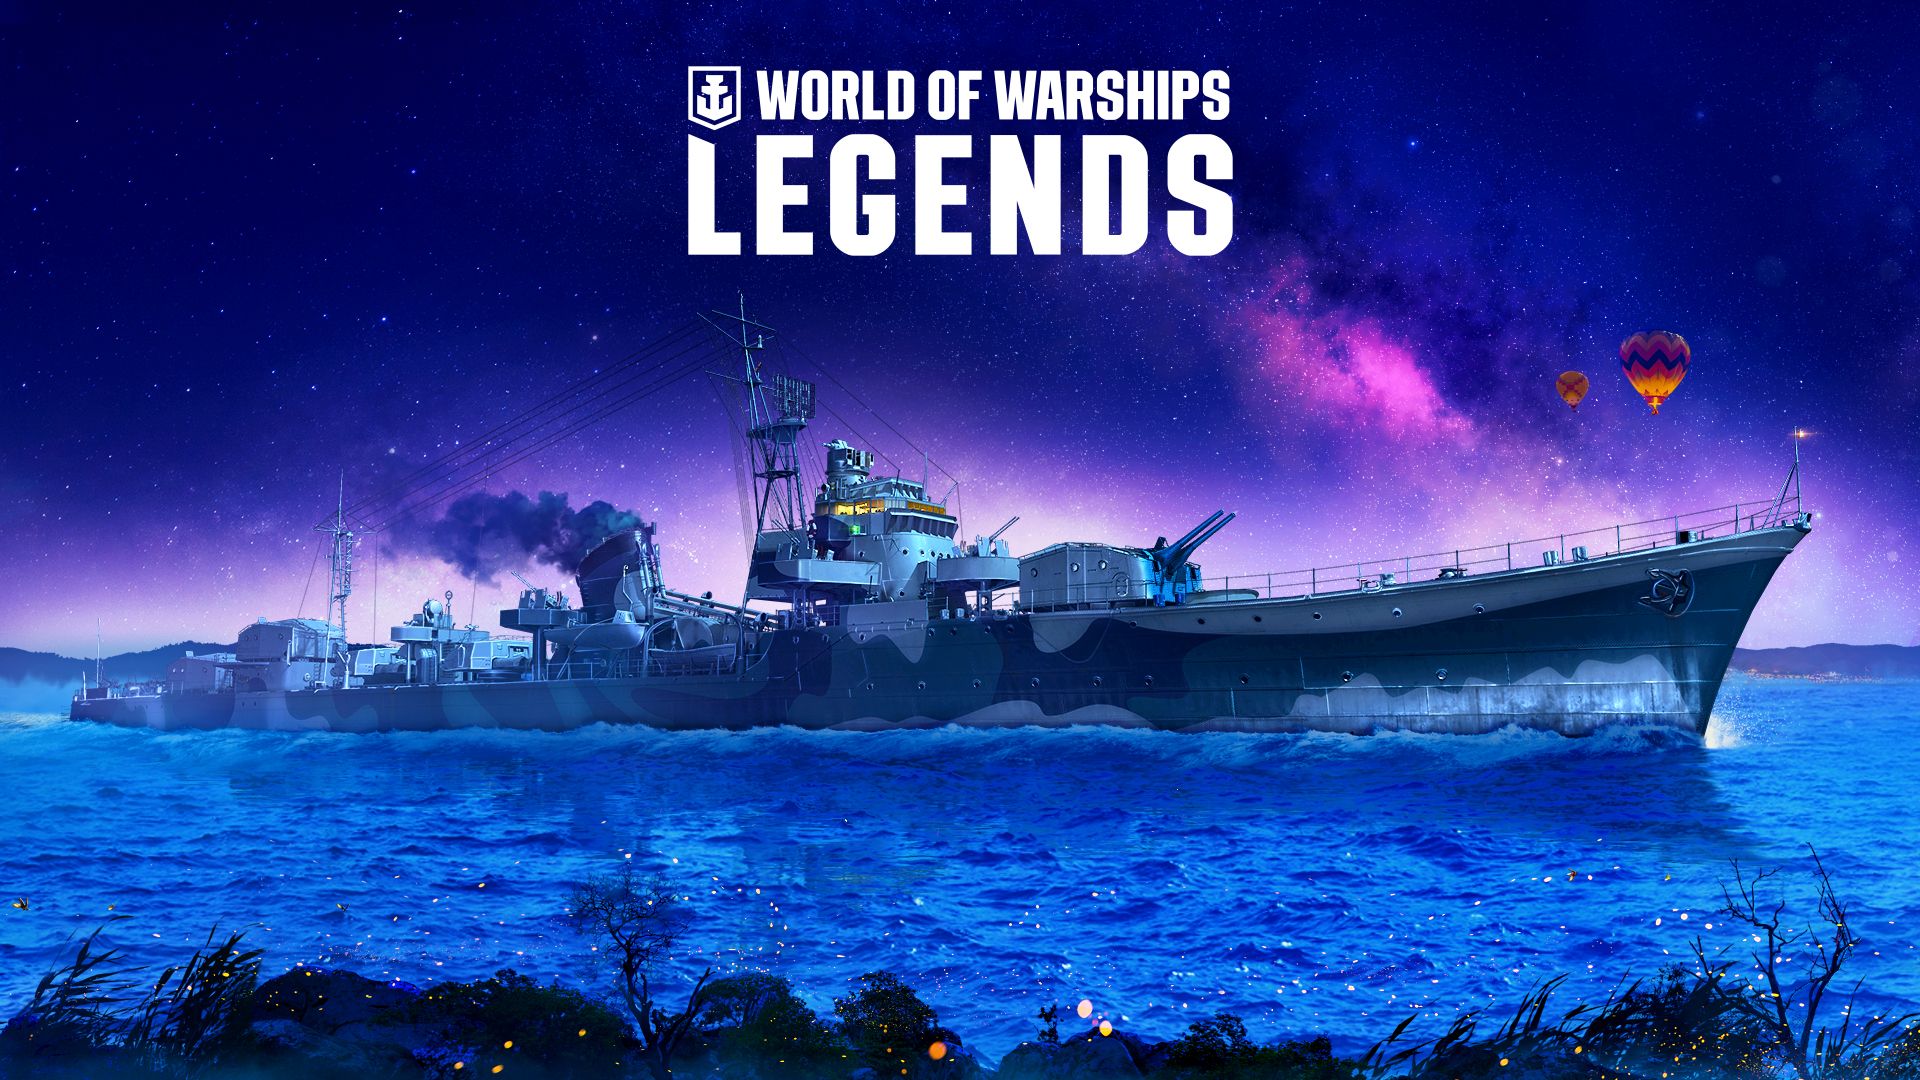 World of Warships: Legends - UPD: the winner's list is in the comments.  Thank you to all who participated and Turn the tide! 8️⃣ 0️⃣ years ago  today, the Bismarck, Germany's legendary